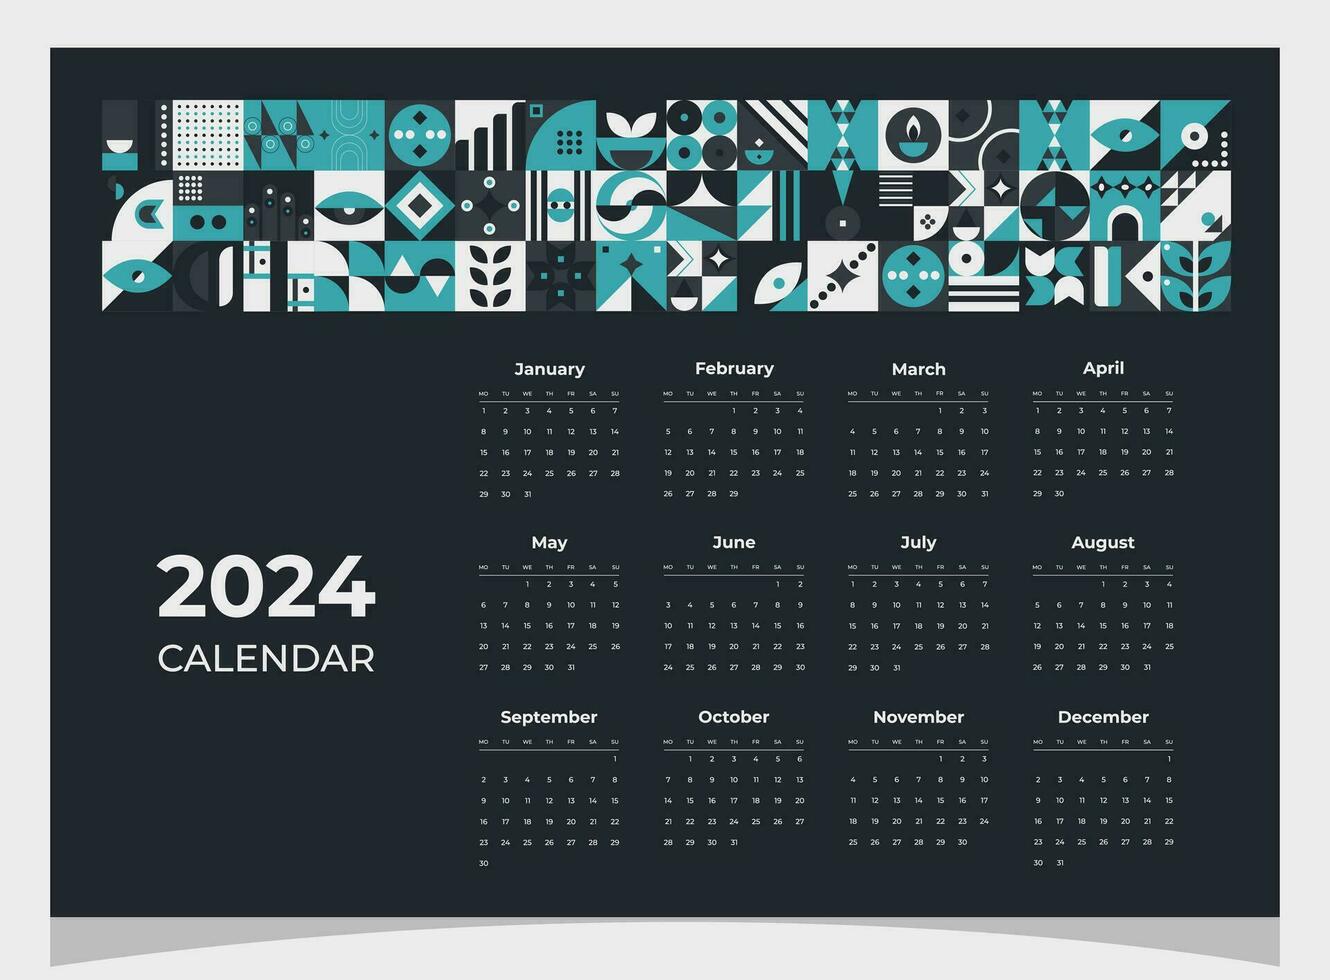 Calendar 2024 geometric patterns. Calendar template for 2024 year with geometric shapes. vector